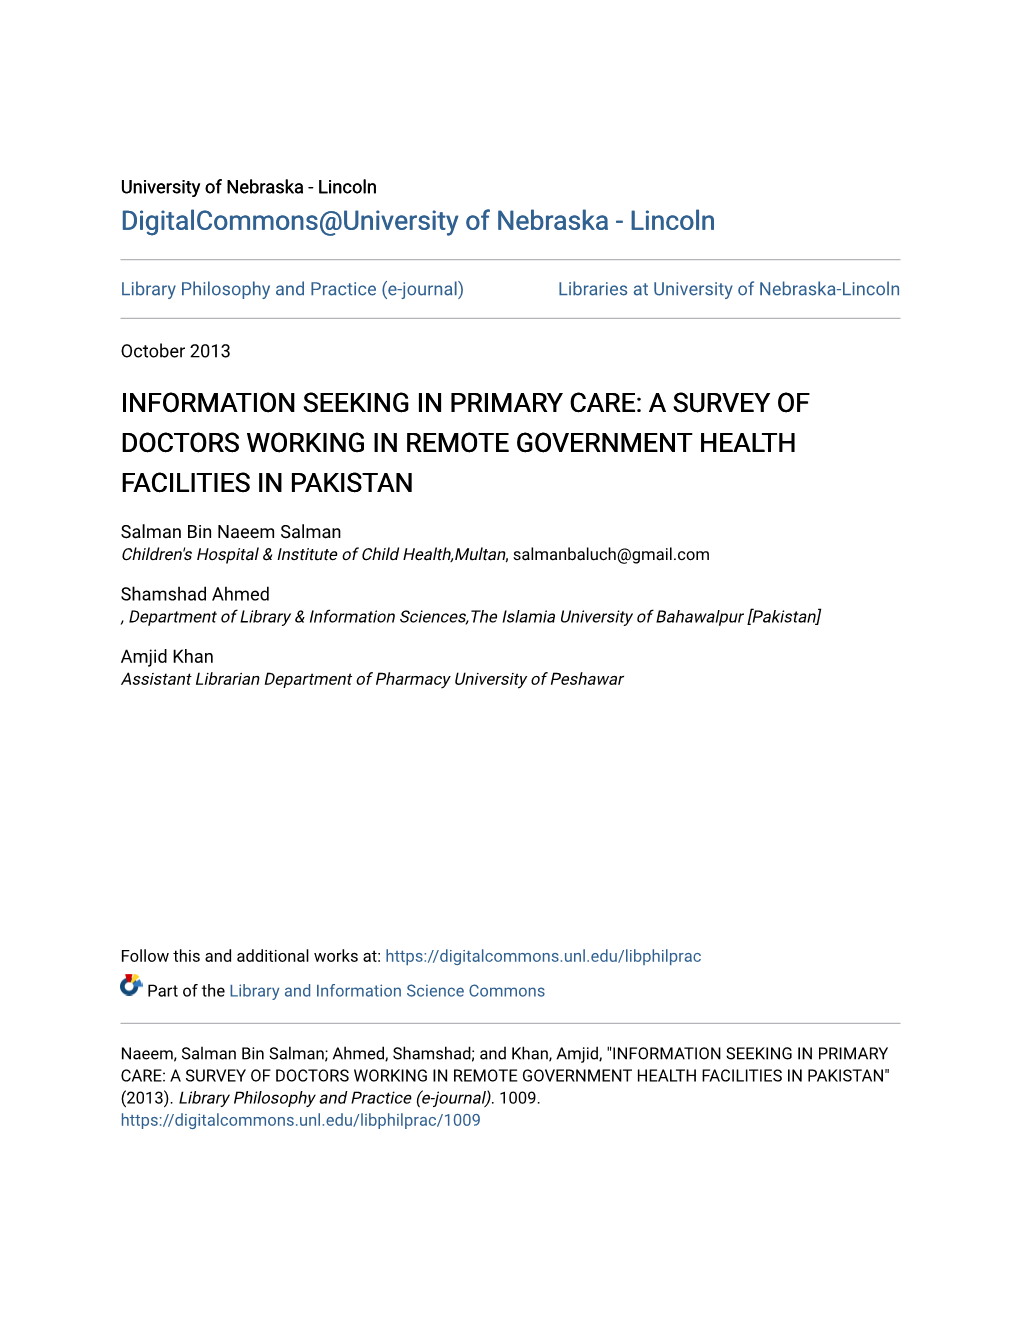 Information Seeking in Primary Care: a Survey of Doctors Working in Remote Government Health Facilities in Pakistan